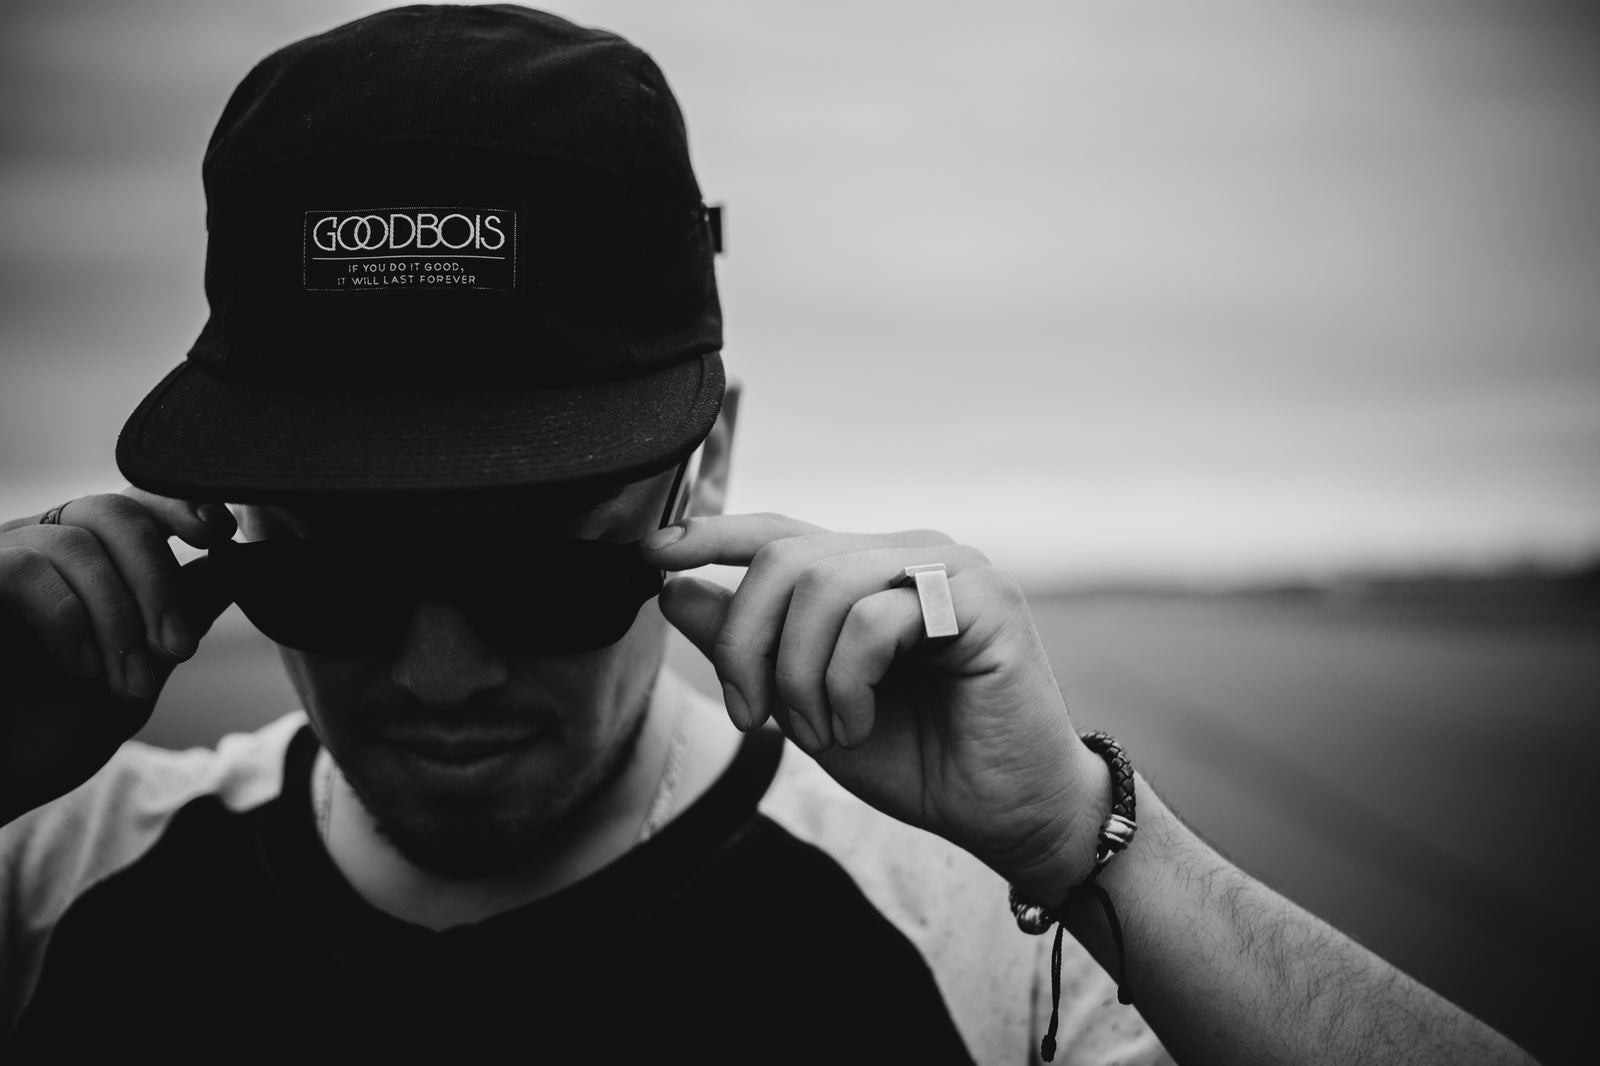 SOULECTION x GOODBOIS x SIGNATURE SERIES 2014